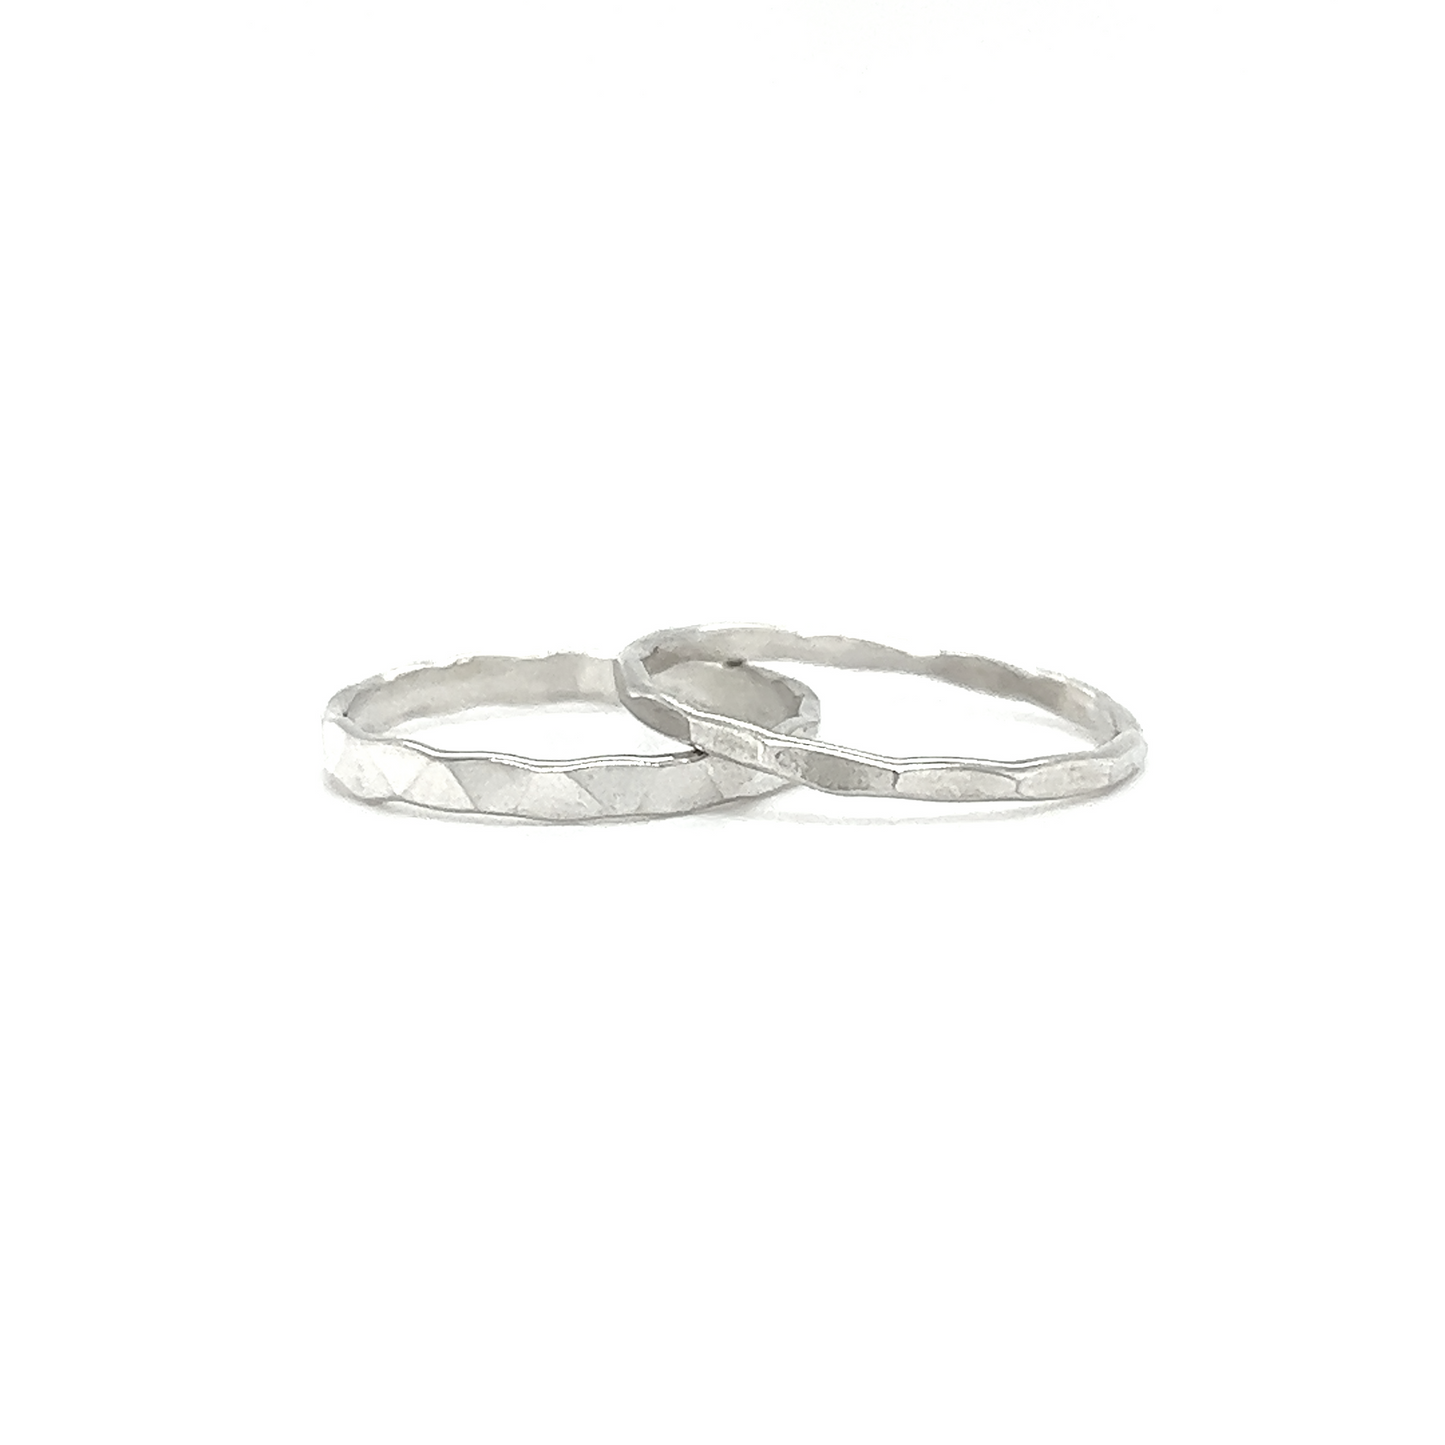 Two Diamond Cut Minimalist Silver Bands on a white background.